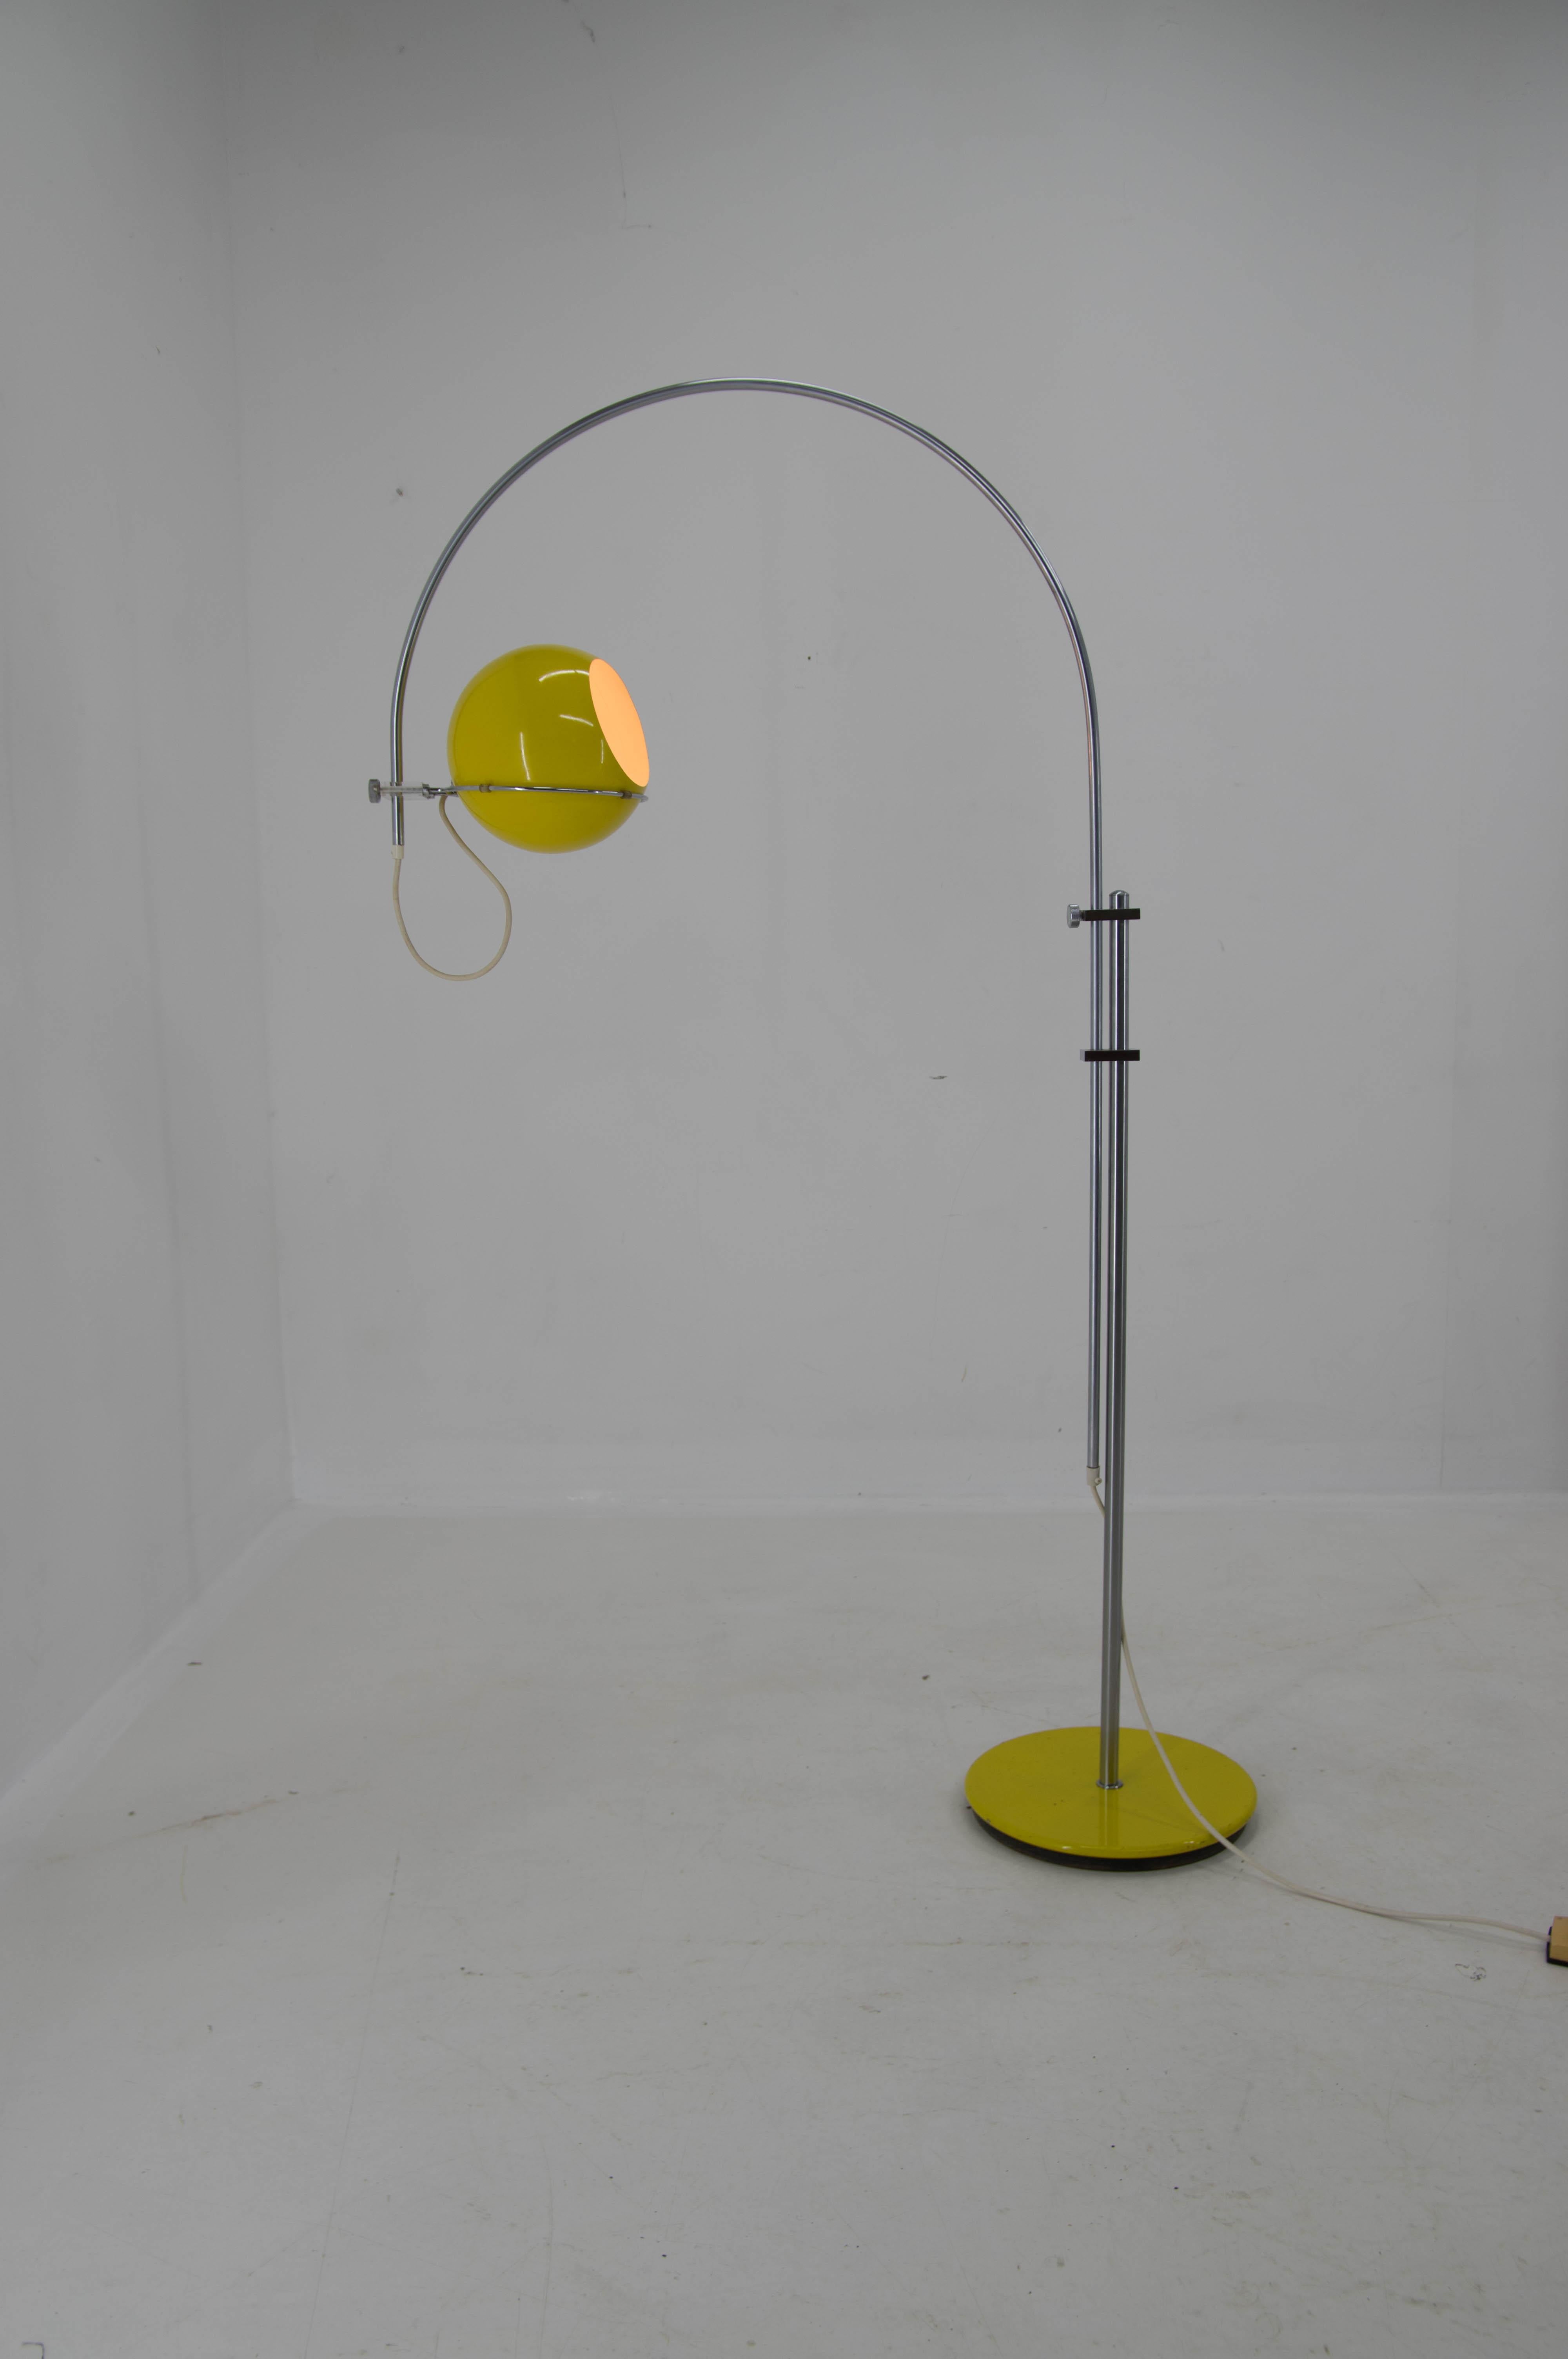 Eye-ball arc floor lamp by GEPO Amsterdam with adjustable shade.
Max height: 165cm.
Wide adjustment range with eye ball shade.
Very good original condition.
1x60W, E25-E27 bulb
US plug adapter included
Shipping quote on request.
 